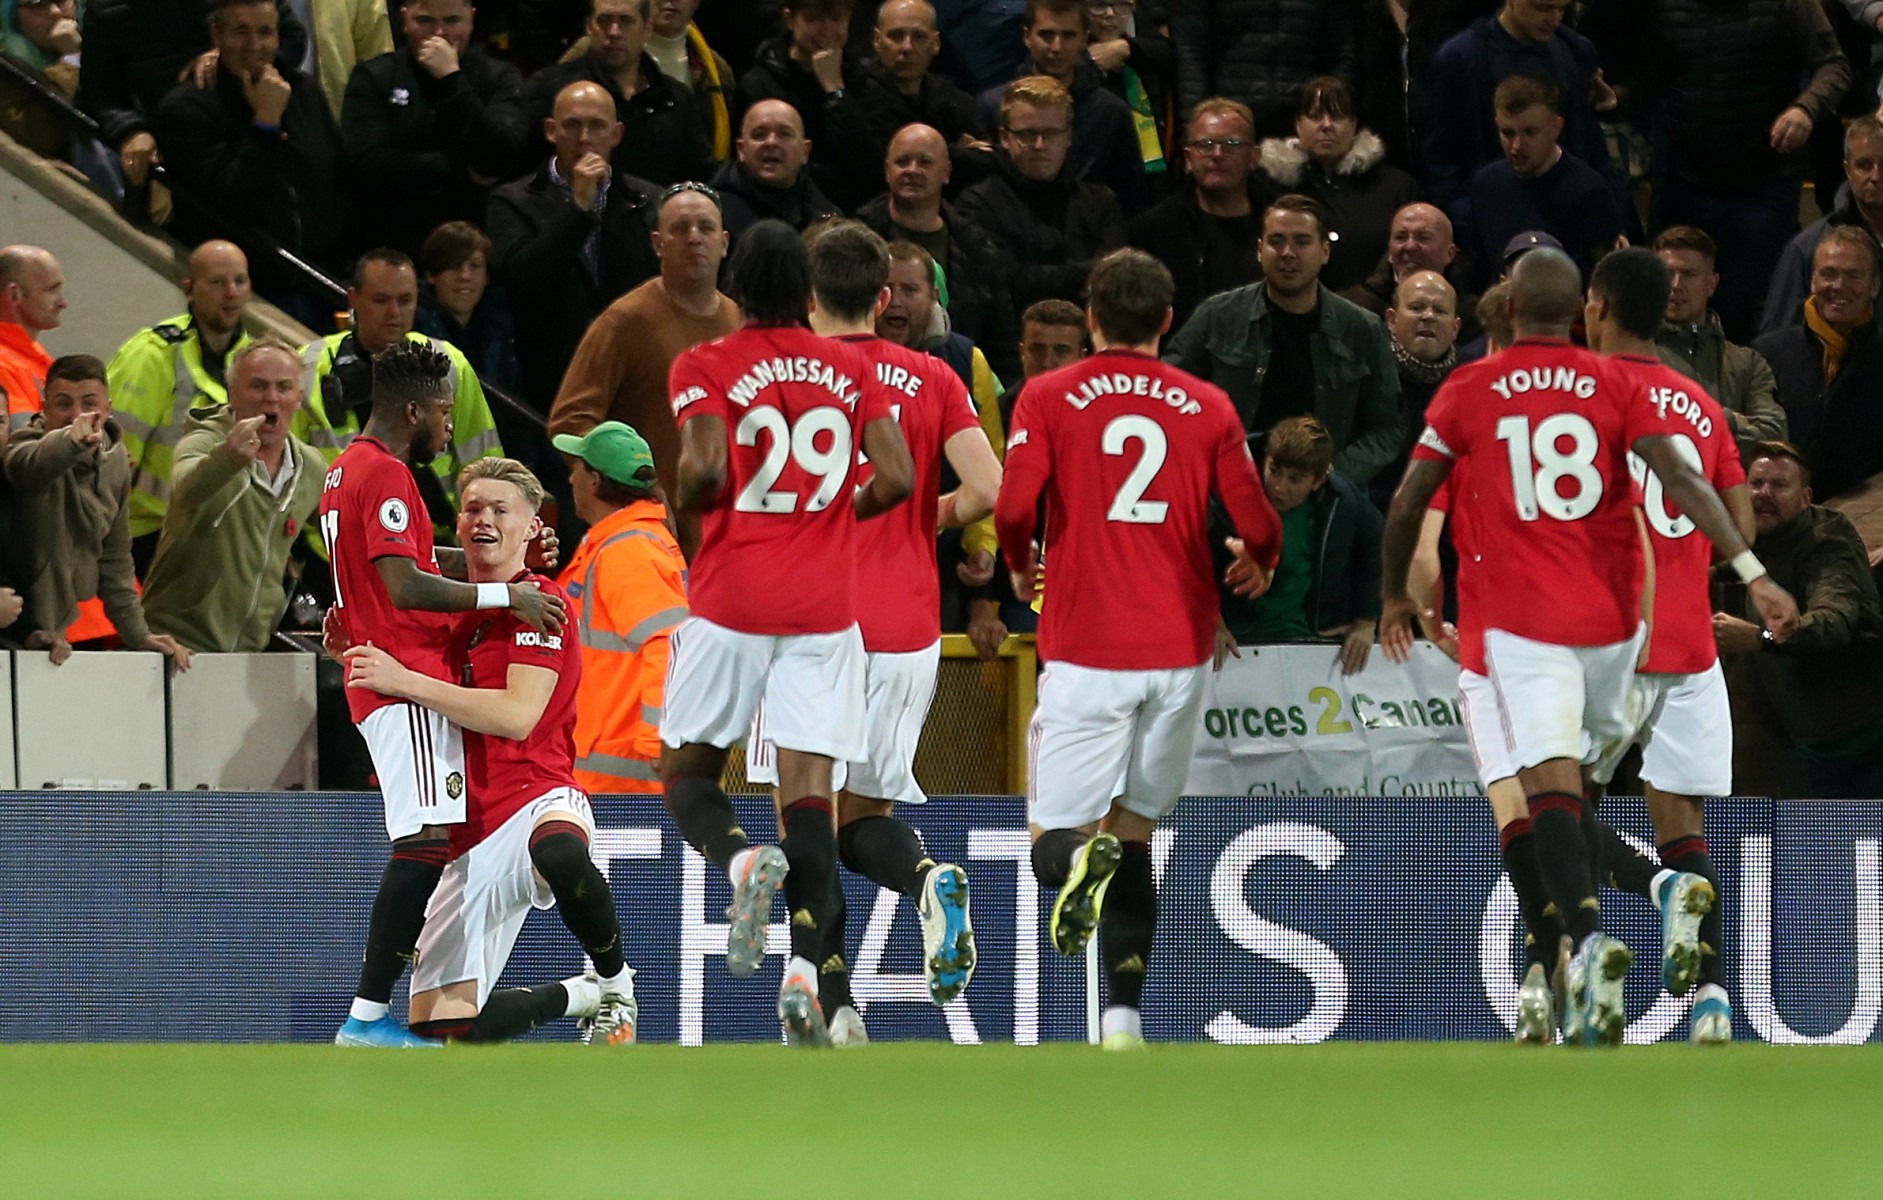 , Norwich 1 Man Utd 3: McTominay, Rashford and Martial earn first Prem away win since February despite missing two pens